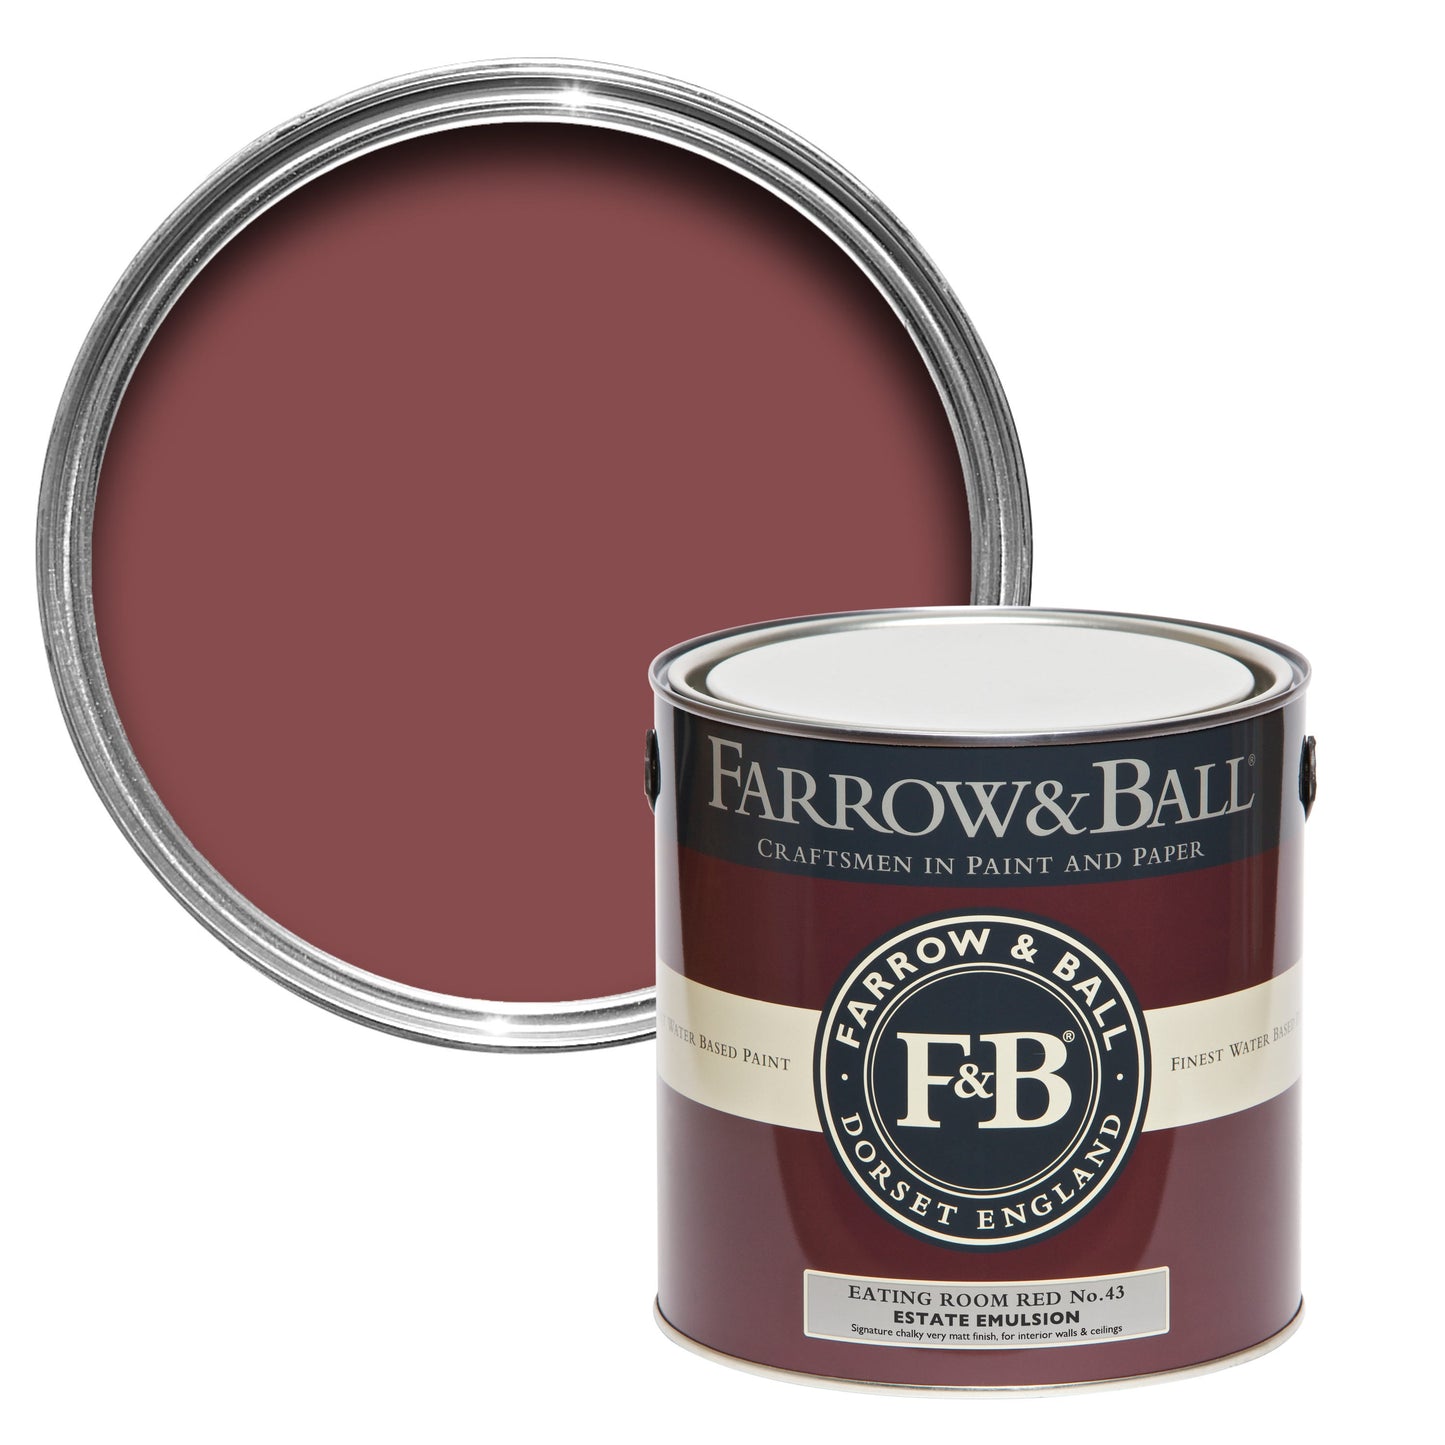 2.5L Exterior Eggshell Eating Room Red No.43